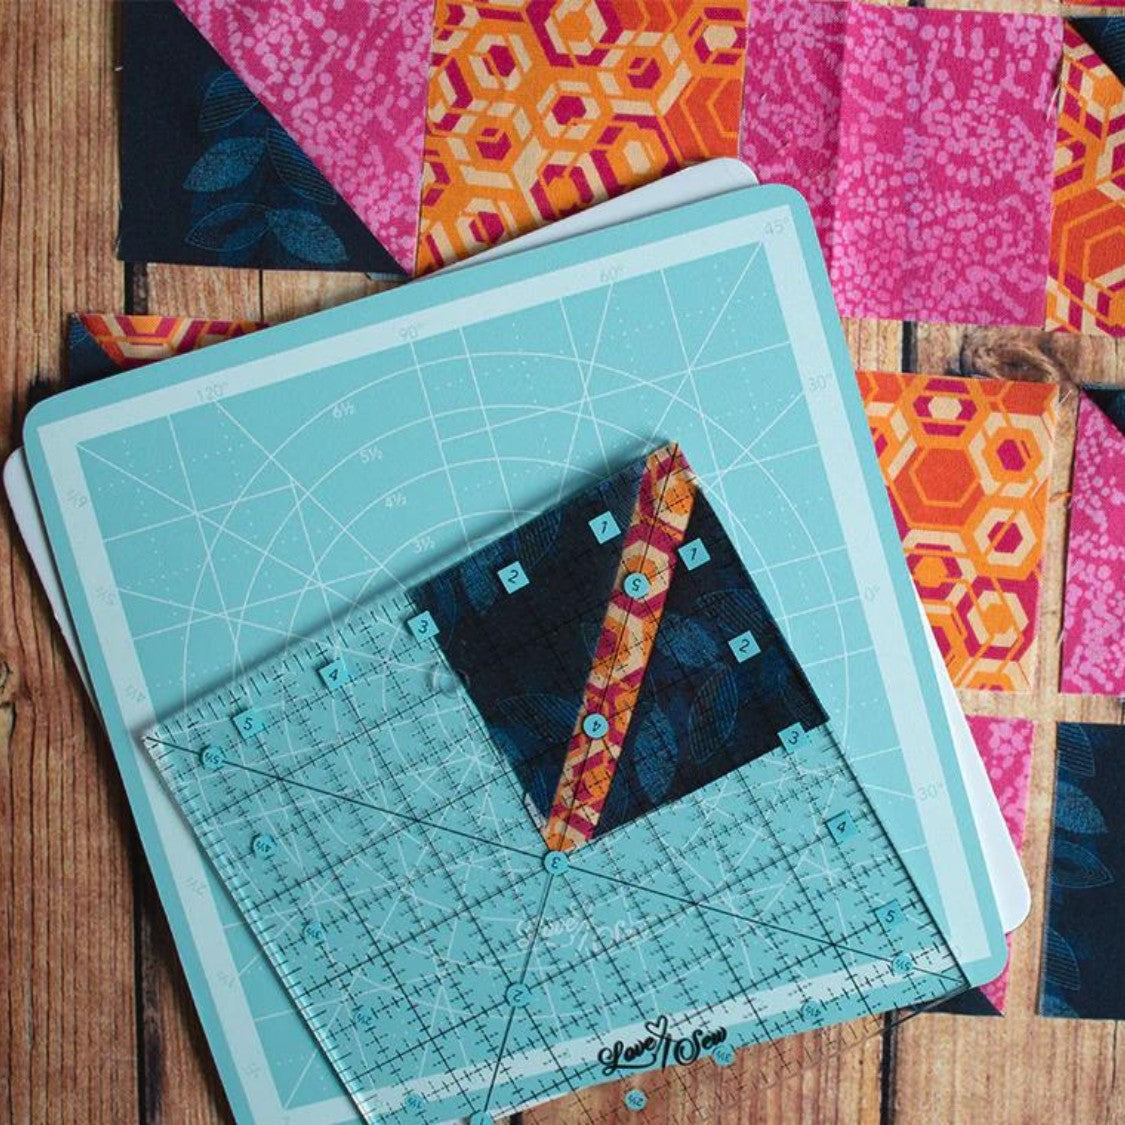 NEW CRAFTERS 8 X 6 SMALL CUTTING MAT WITH INCHES AND ANGLES